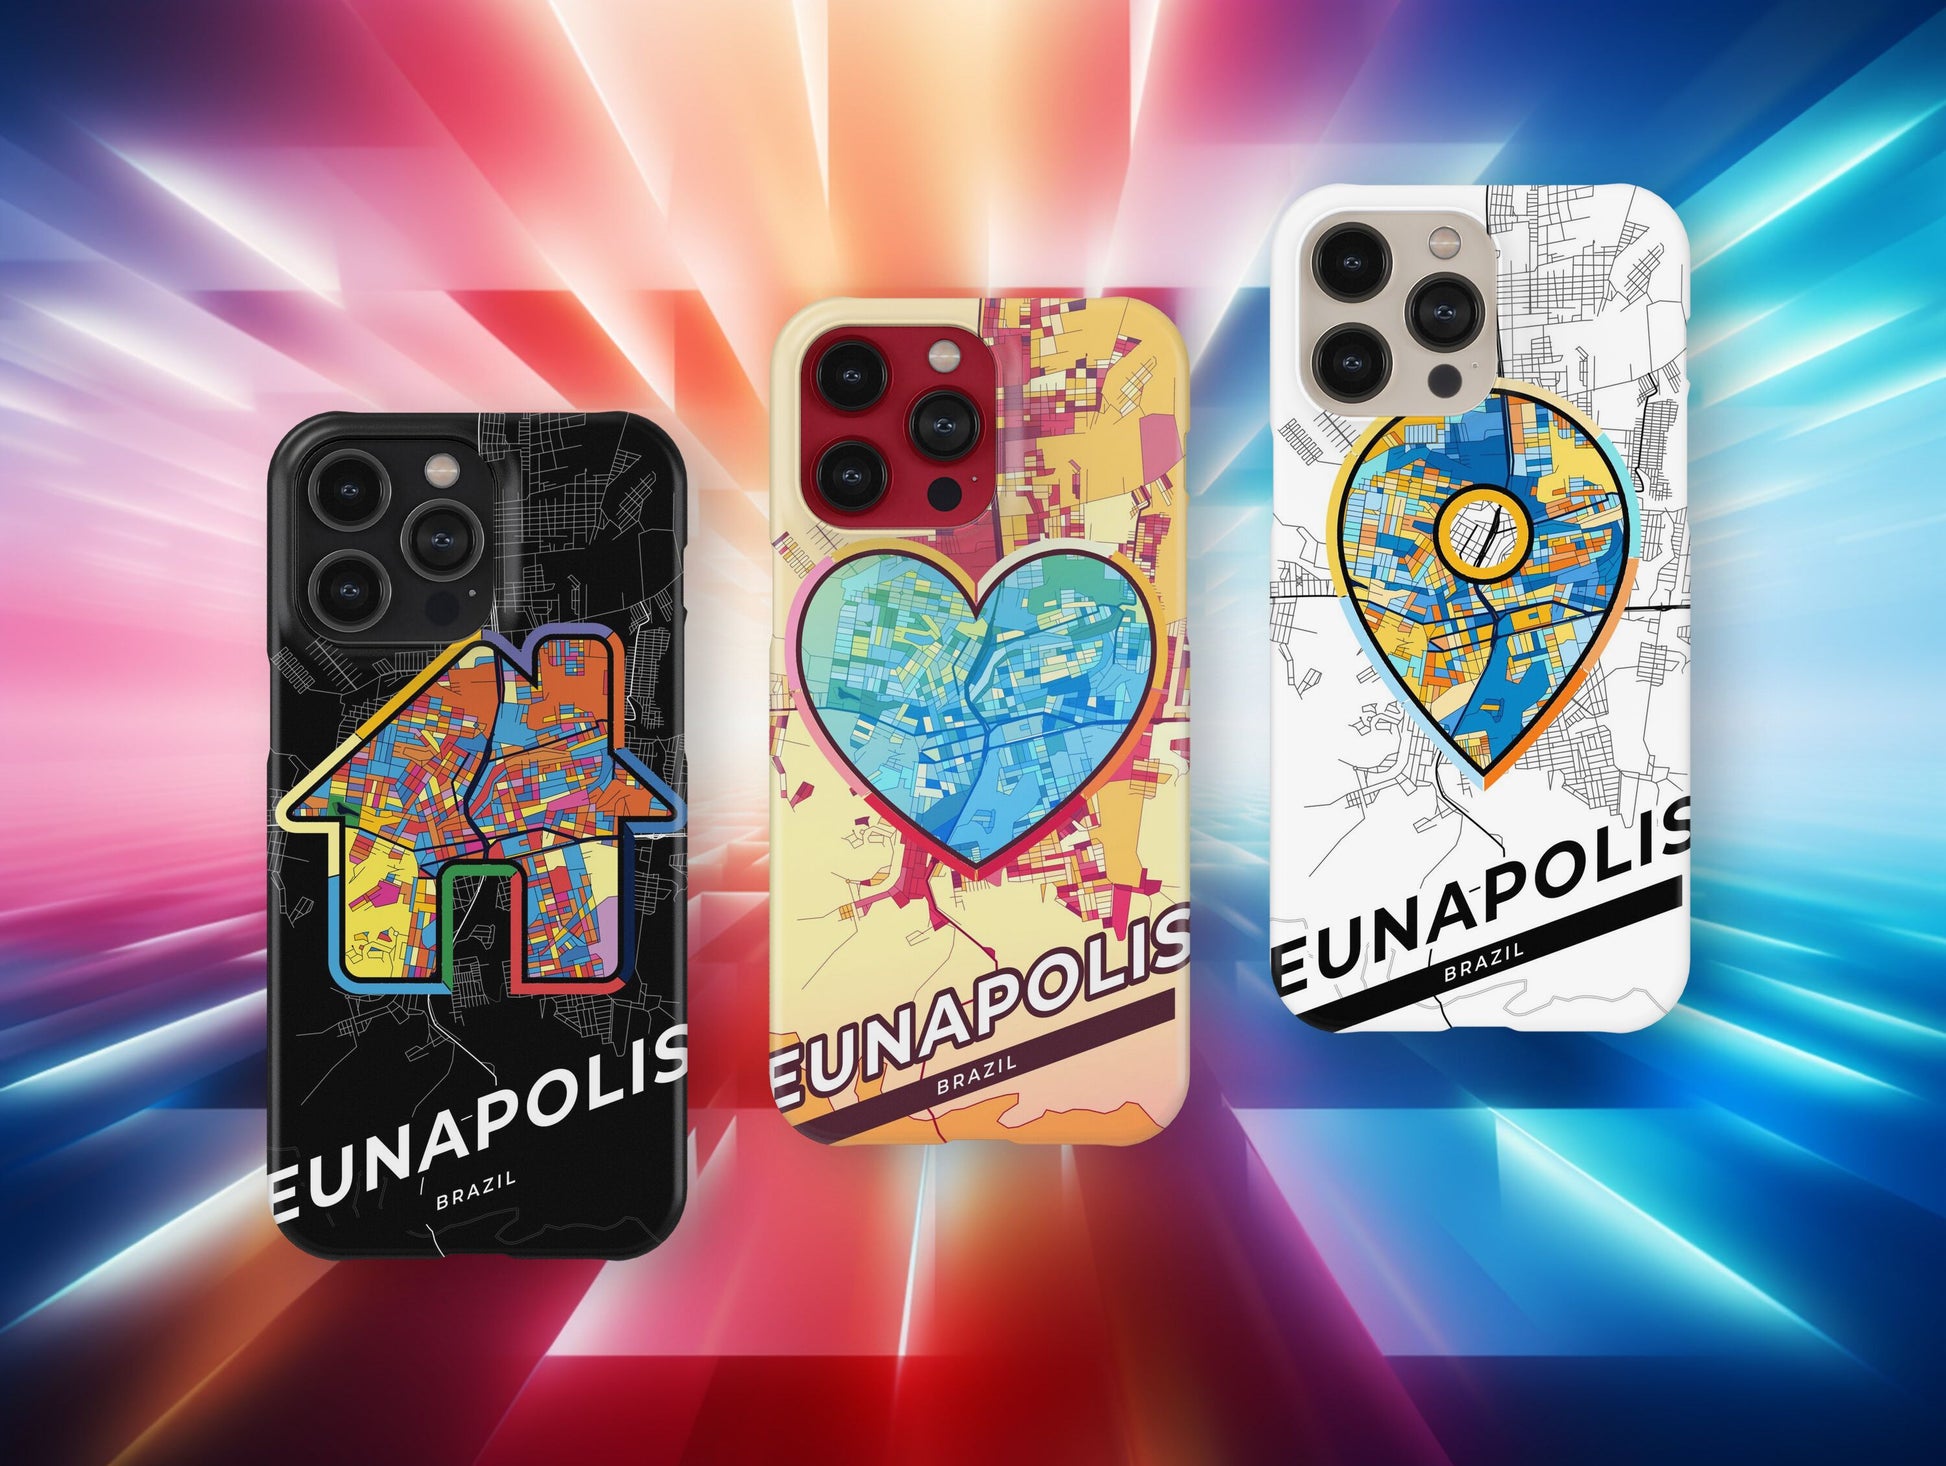 Eunapolis Brazil slim phone case with colorful icon. Birthday, wedding or housewarming gift. Couple match cases.